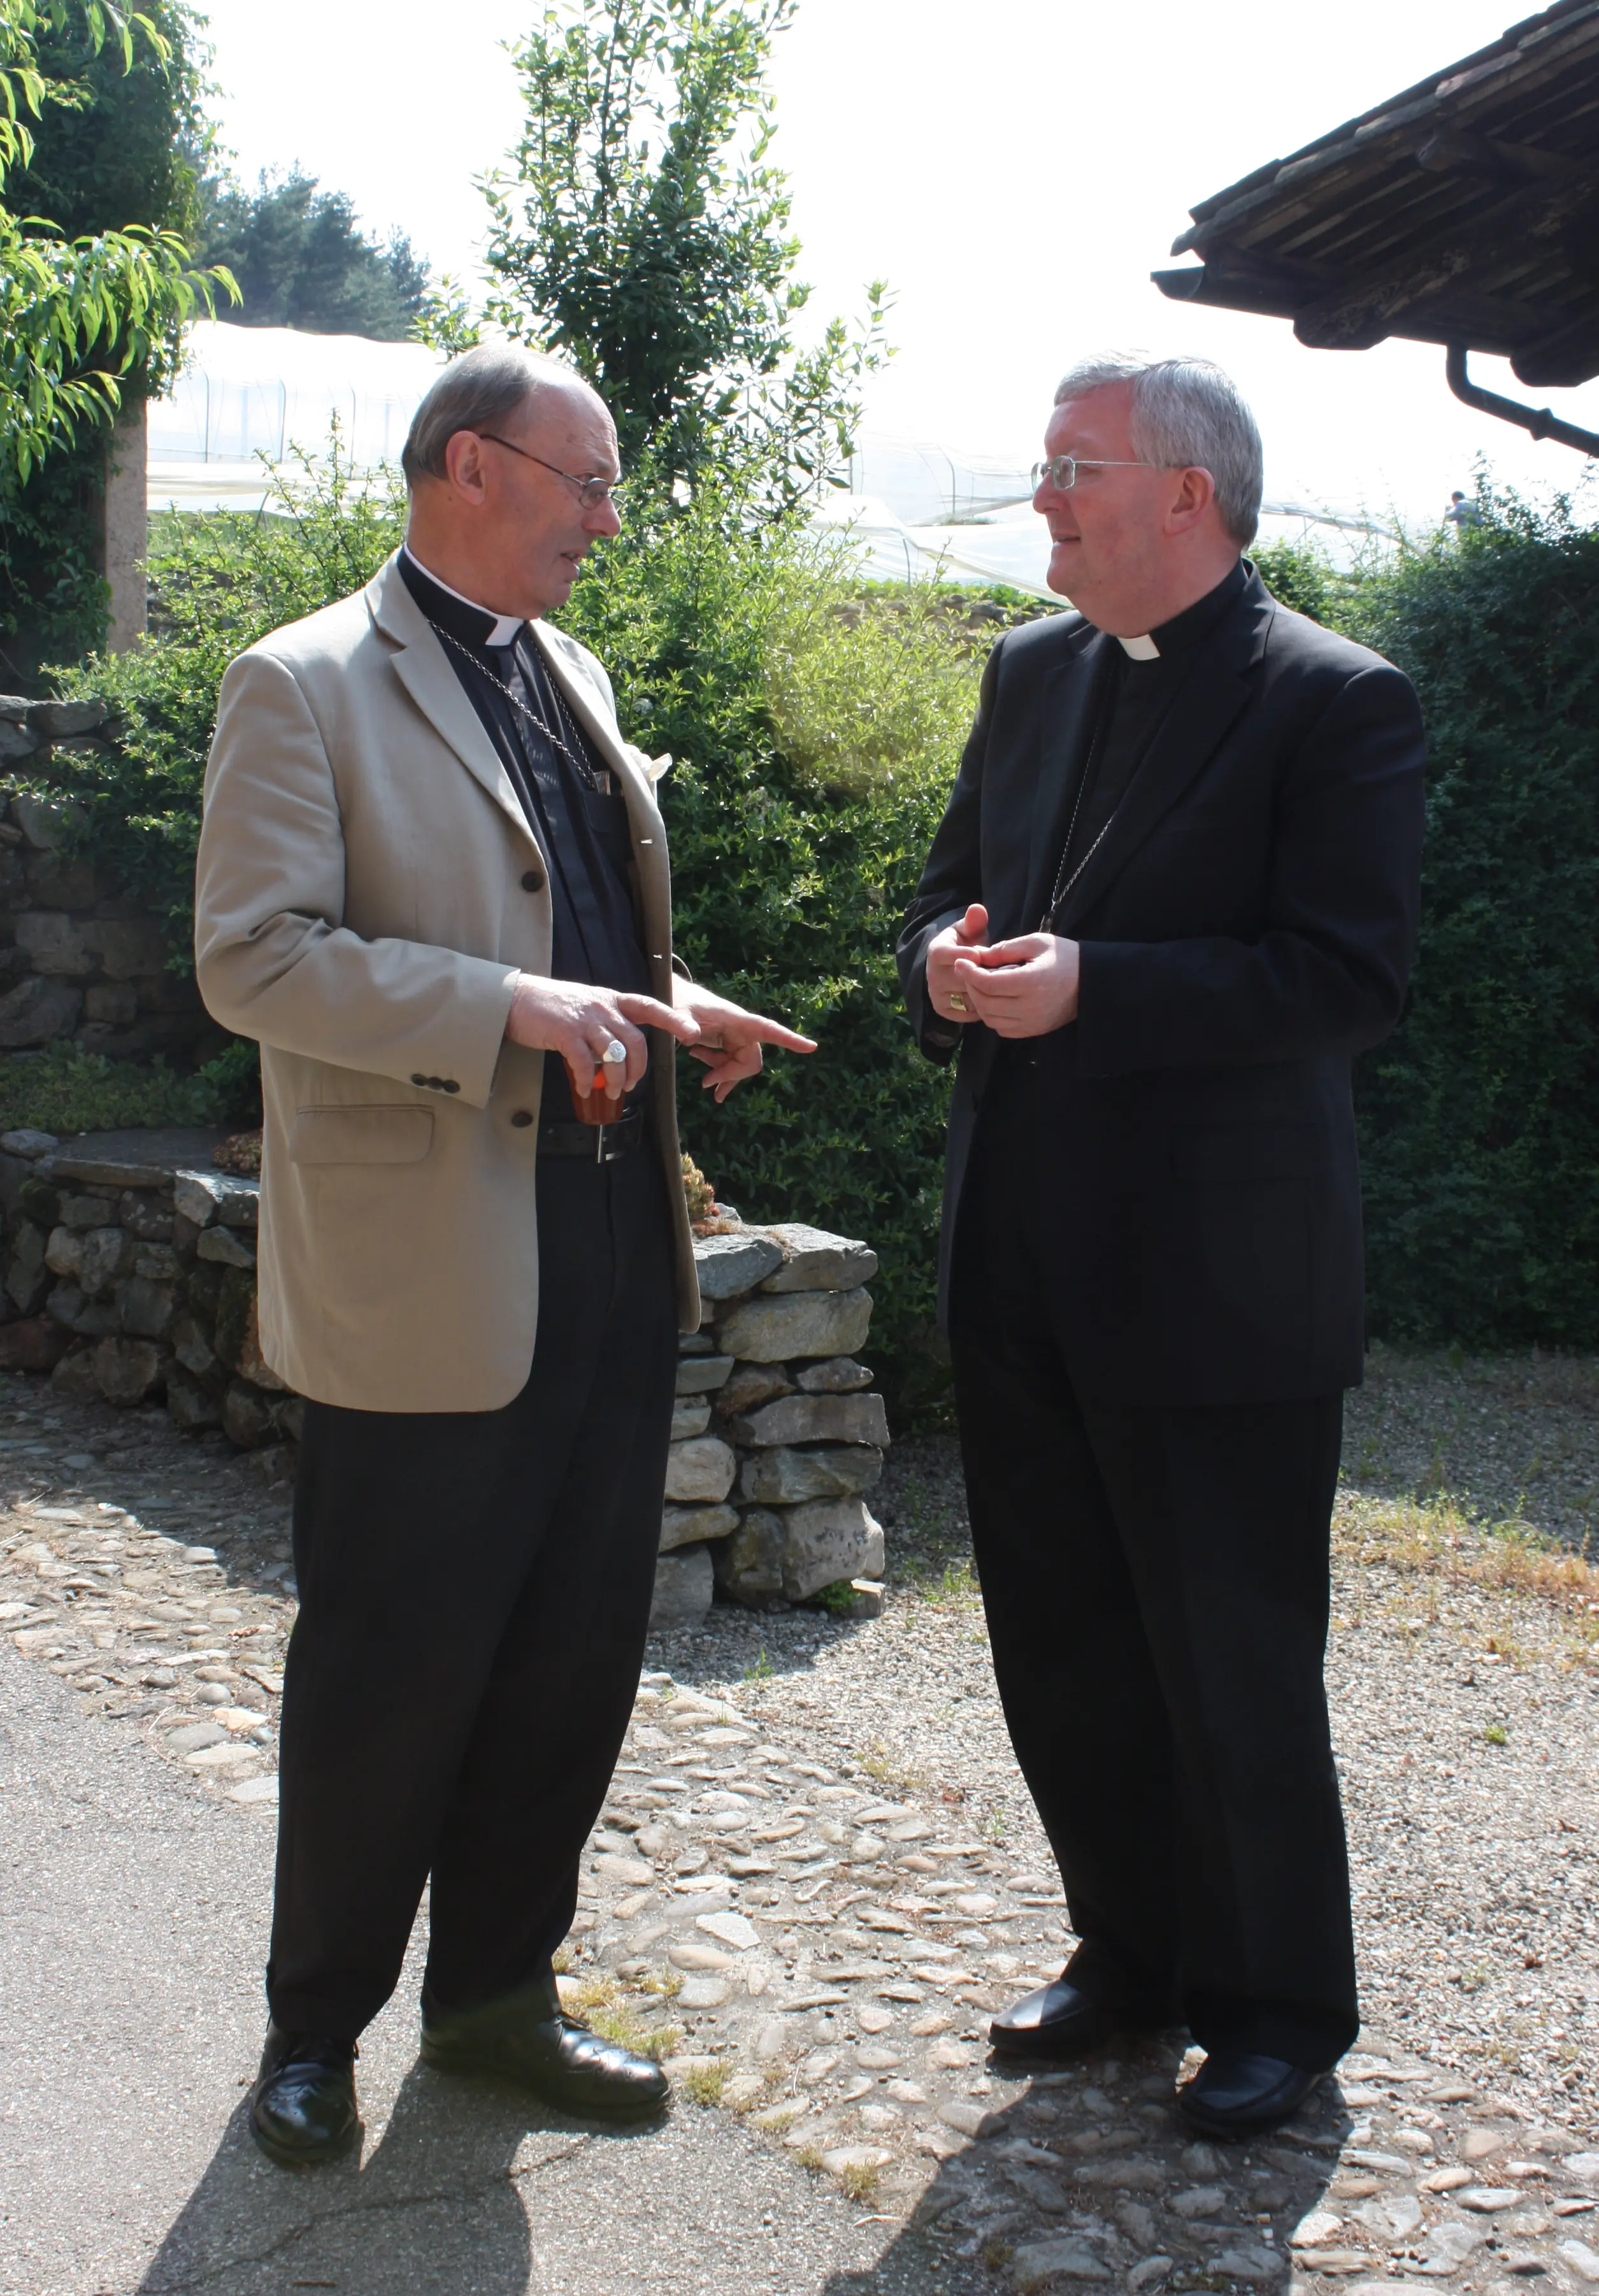 Bishop Christopher Hill and Archbishop Bernard Longley talking during a break from the ARCIC meeting at Bose